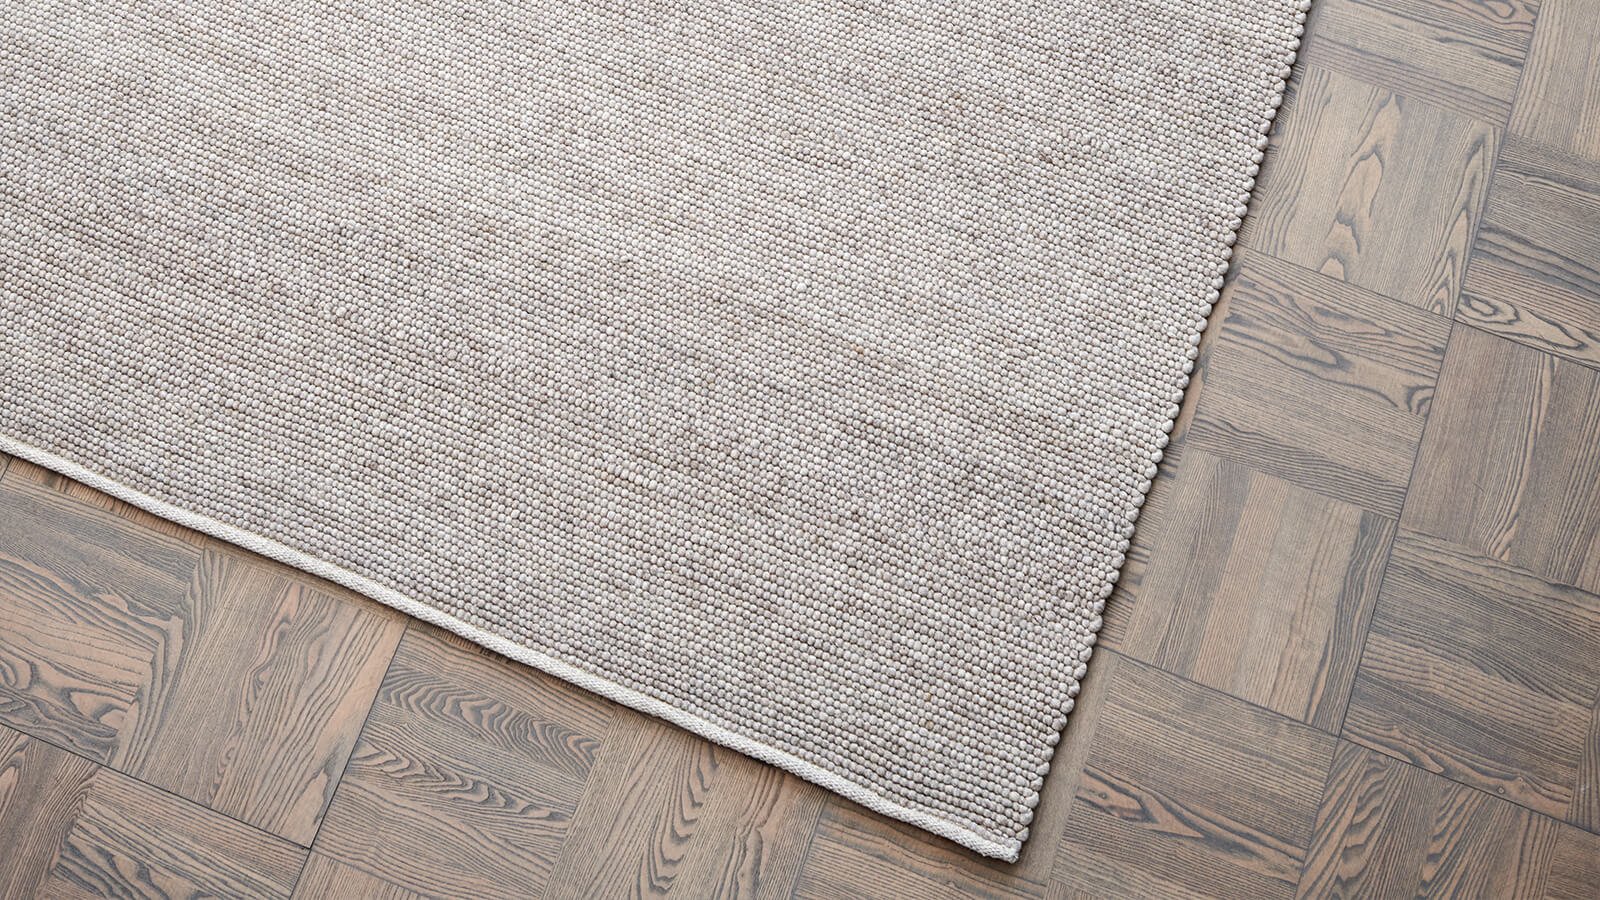 Runner rugs for hallways and kitchens - Wide range - Buy now